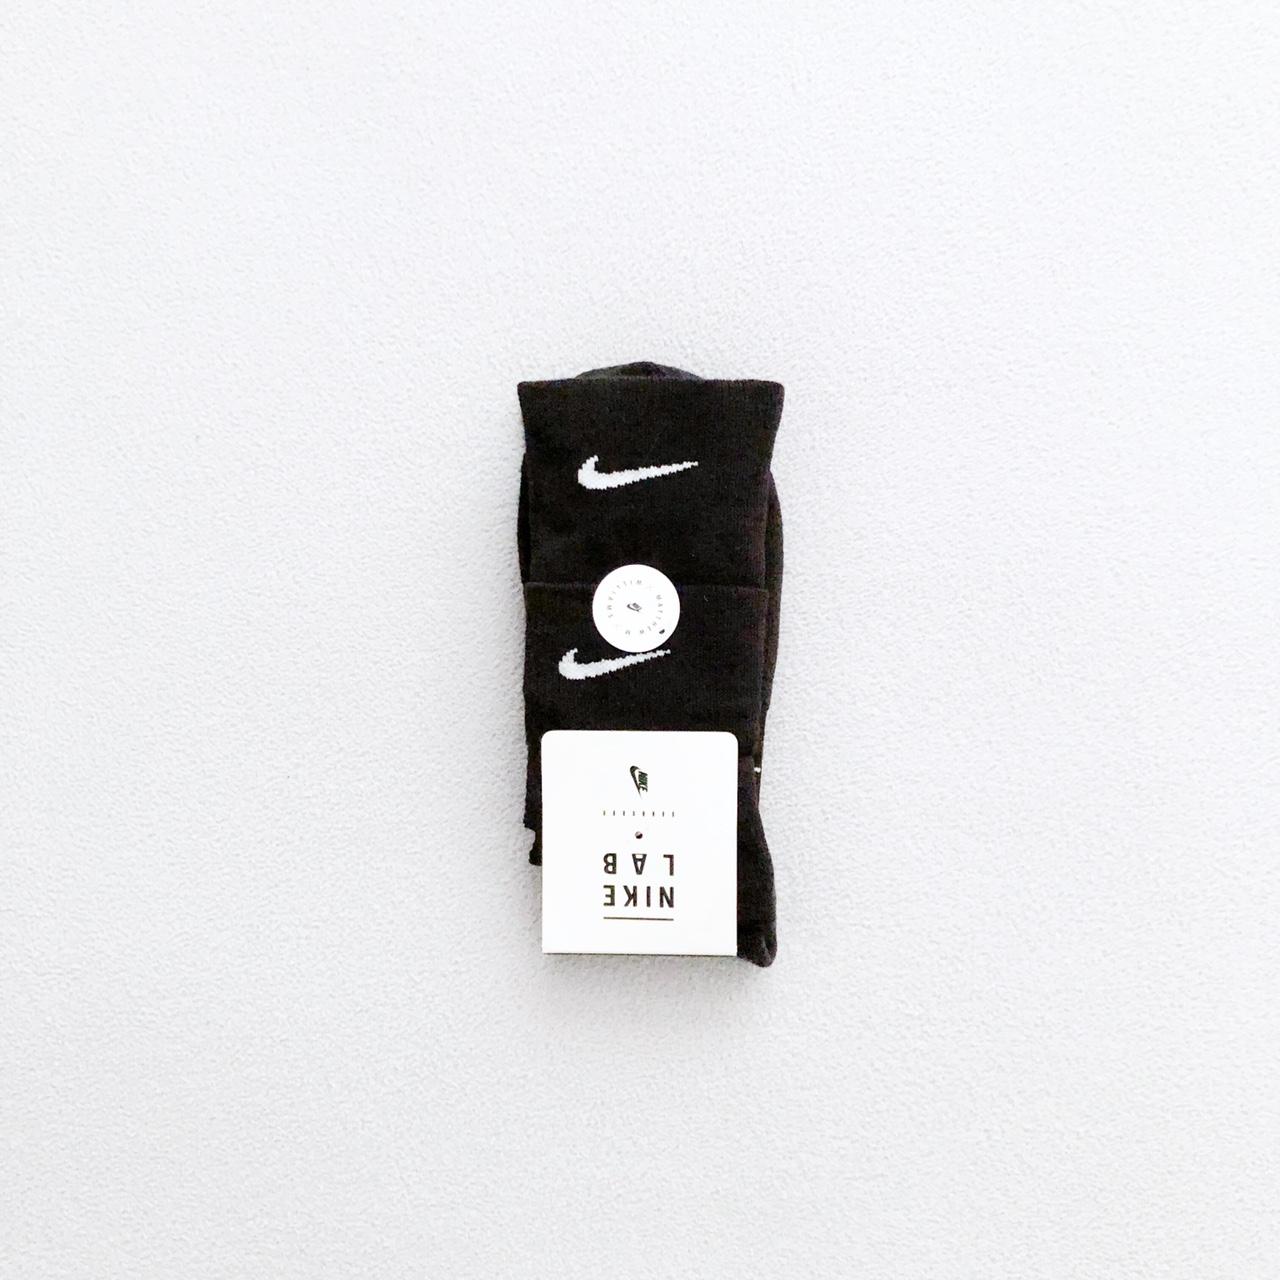 Nike x MMW Socks in Black Size S and L available - Depop